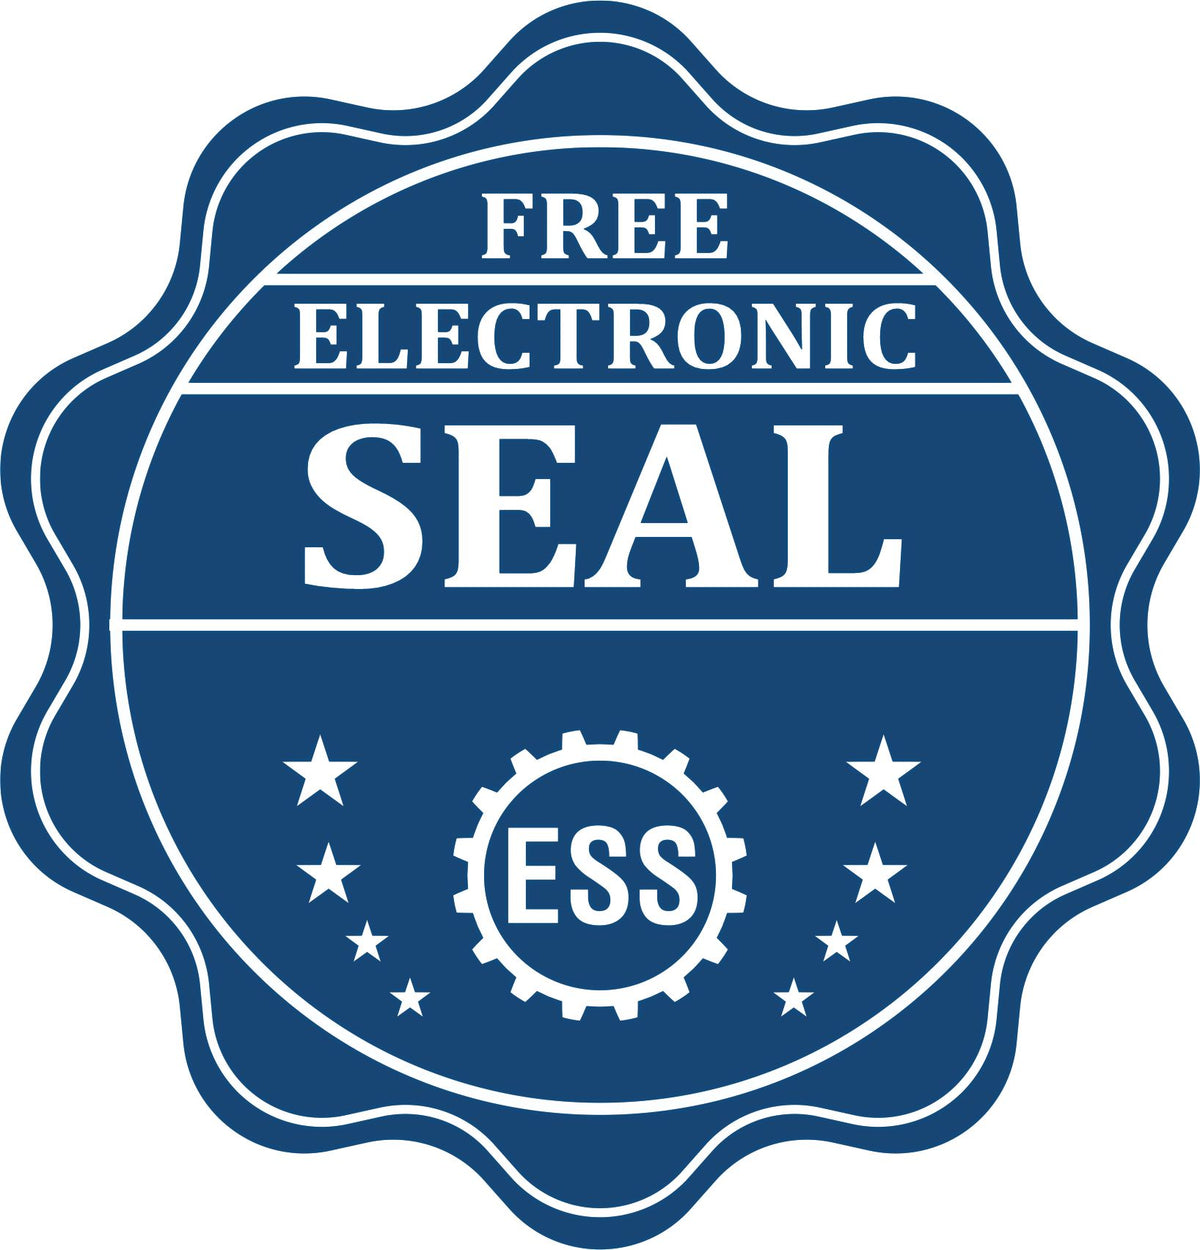 A badge showing a free electronic seal for the PSI Louisiana Notary Stamp with stars and the ESS gear on the emblem.